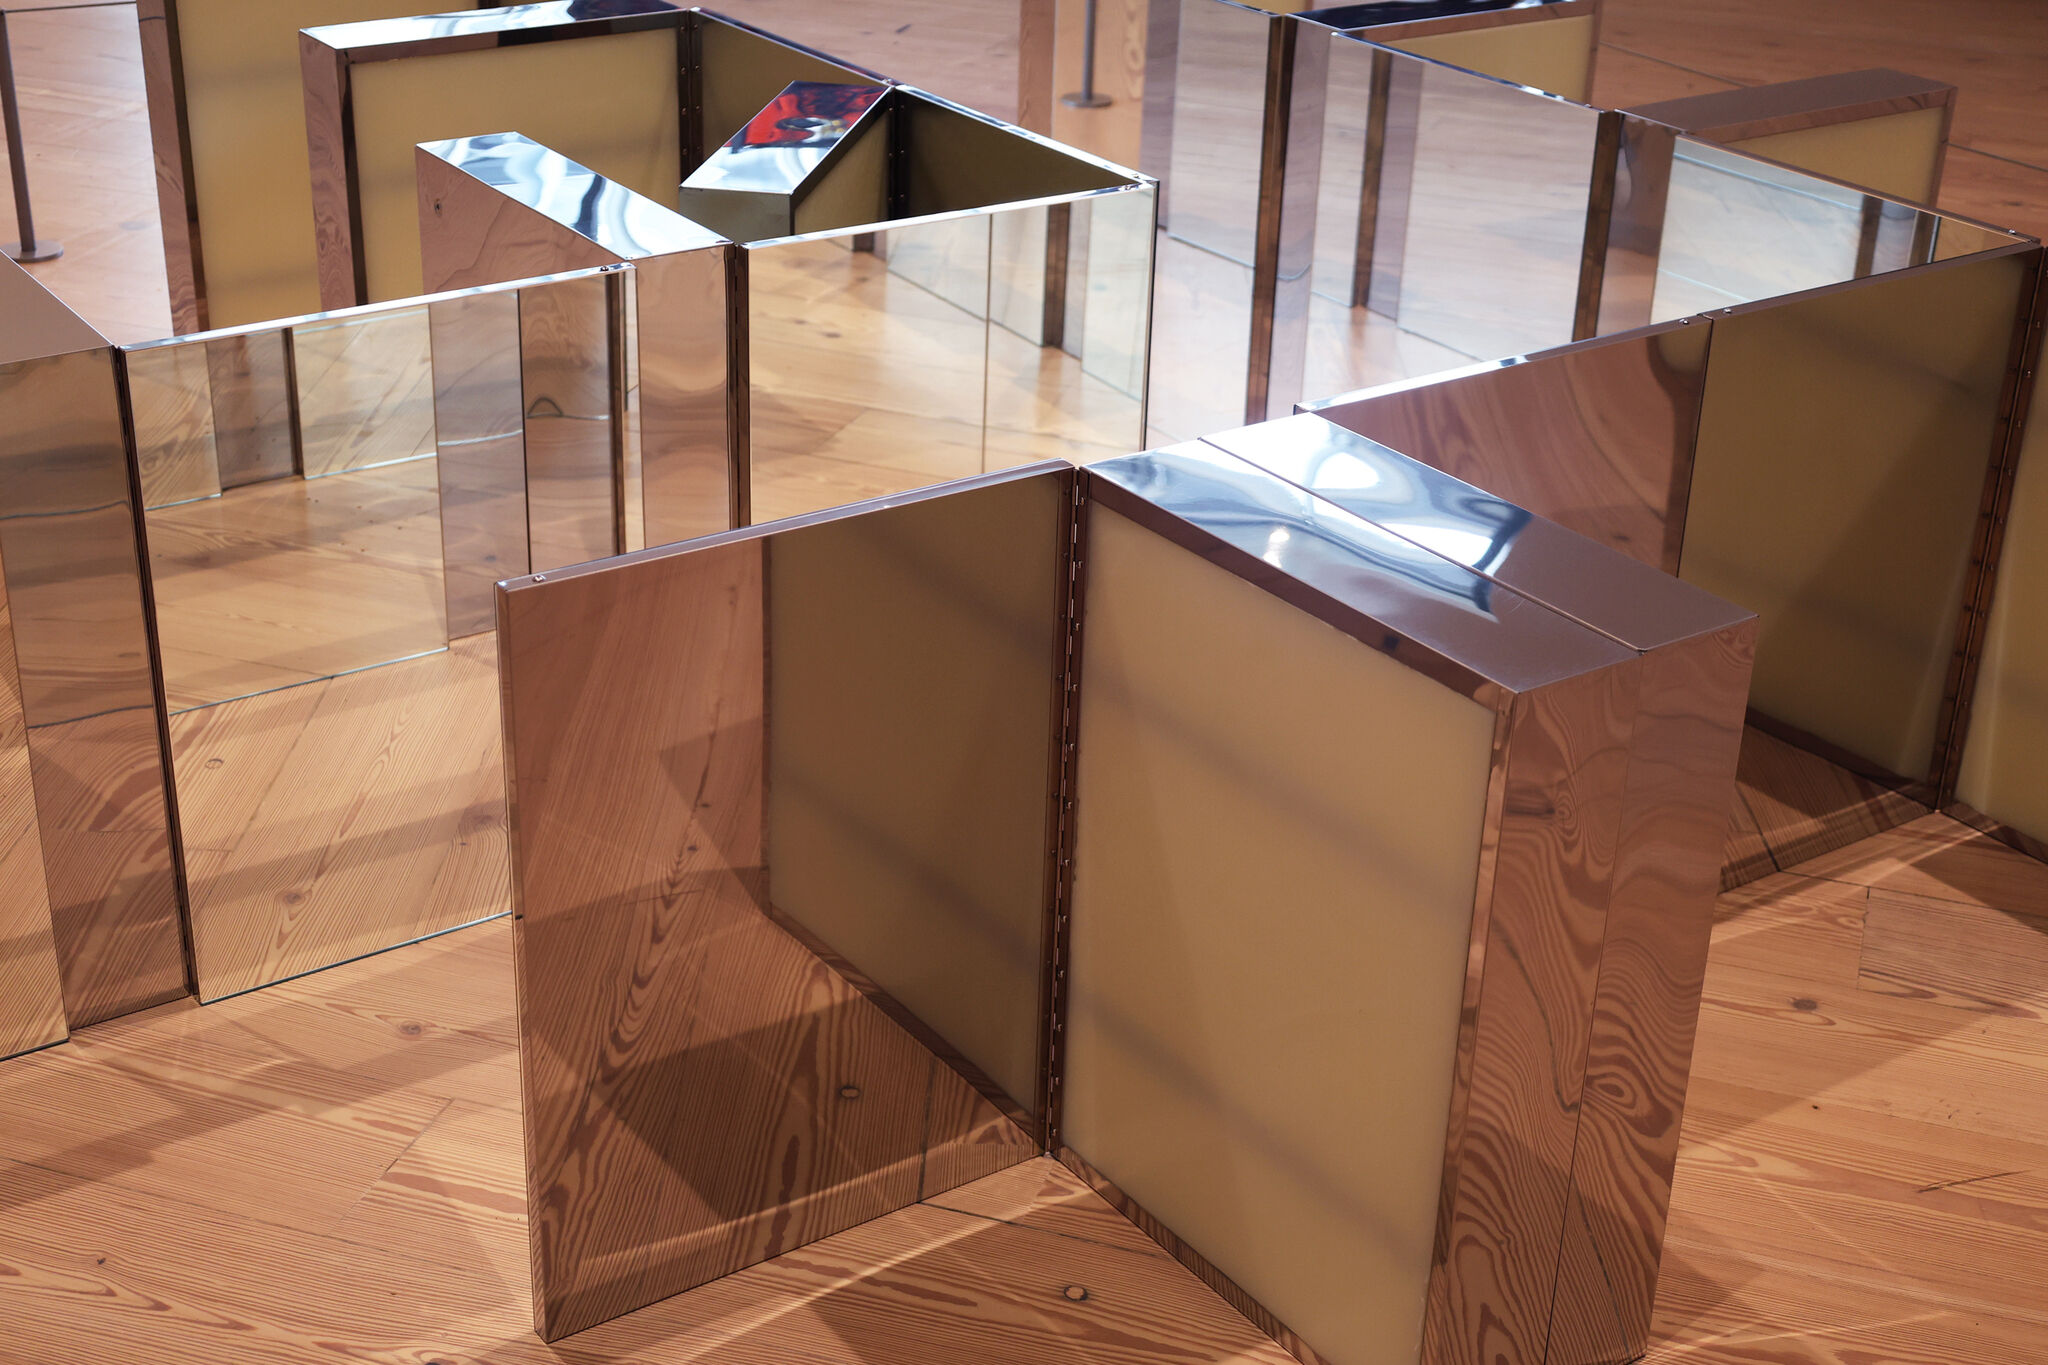 Medicine cabinets placed on the ground and forming geometric shapes obscured by mirrors. 